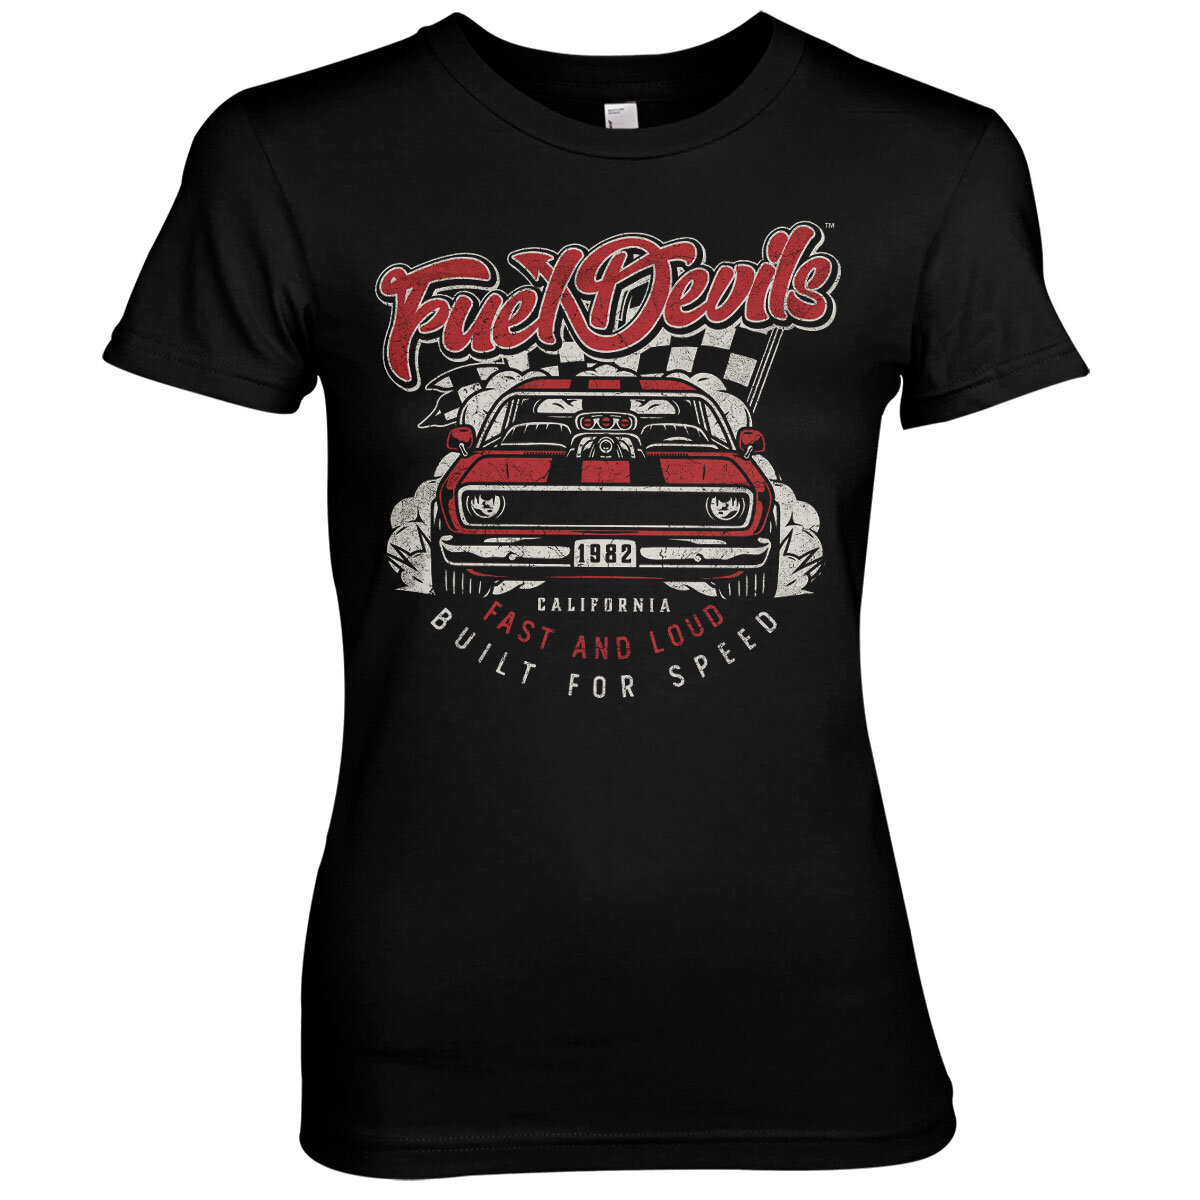 Fuel Devils Fast And Loud Girly Tee